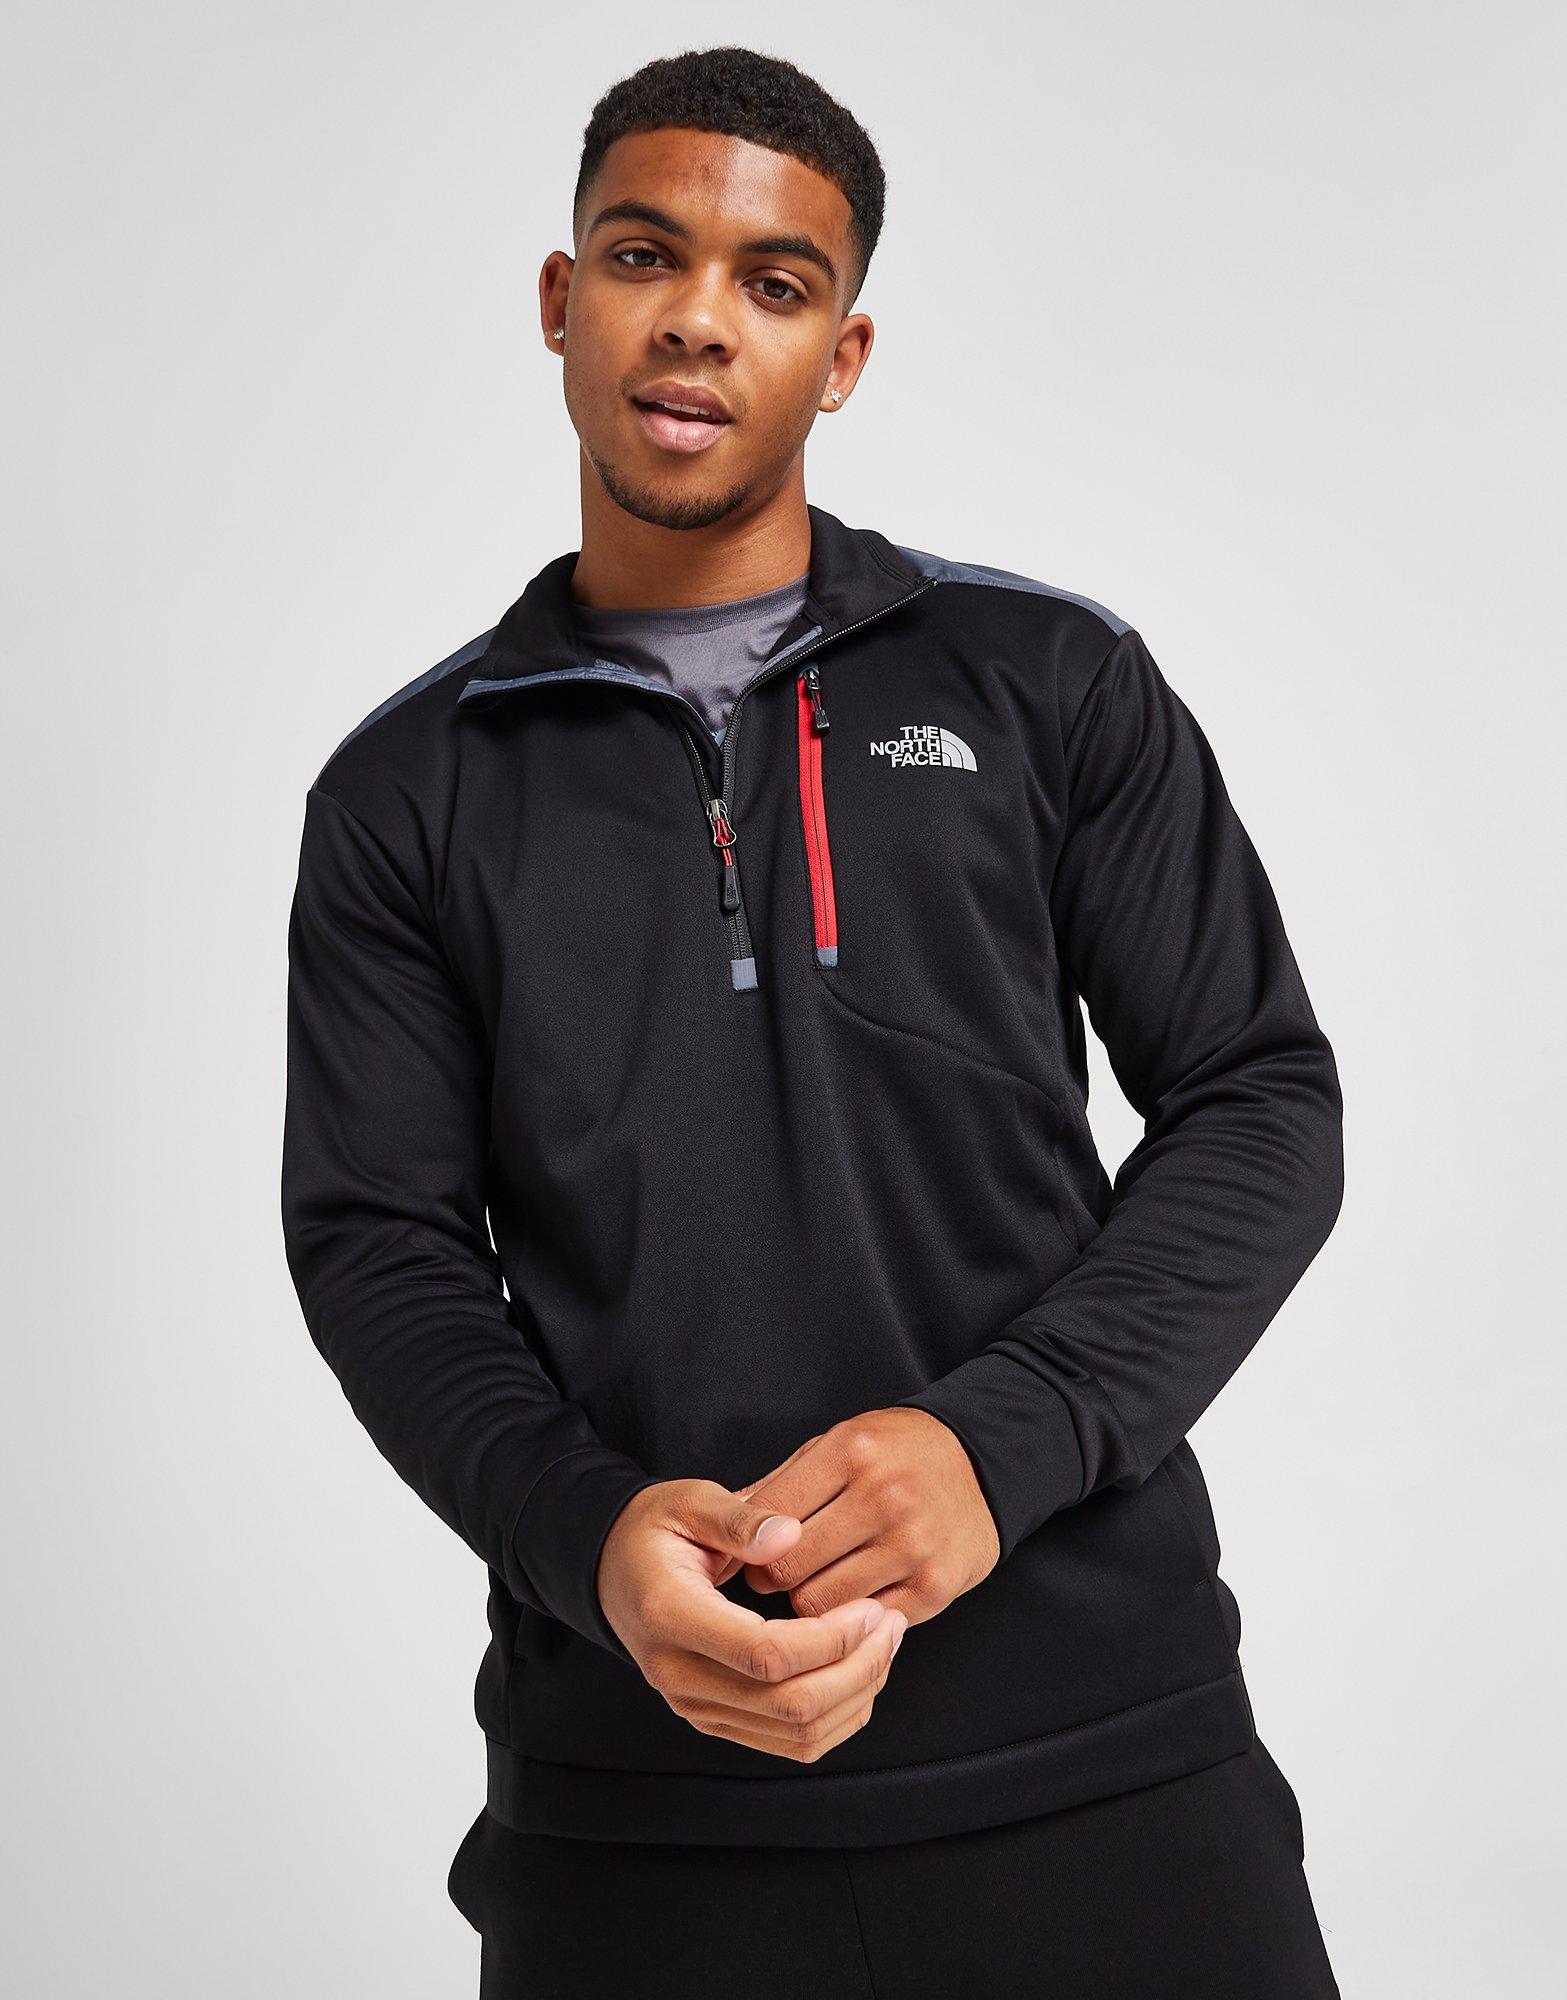 The North Face Jacket 1/4 Zip Polar Fleece Cropped Pullover Black New  DEFECT XS